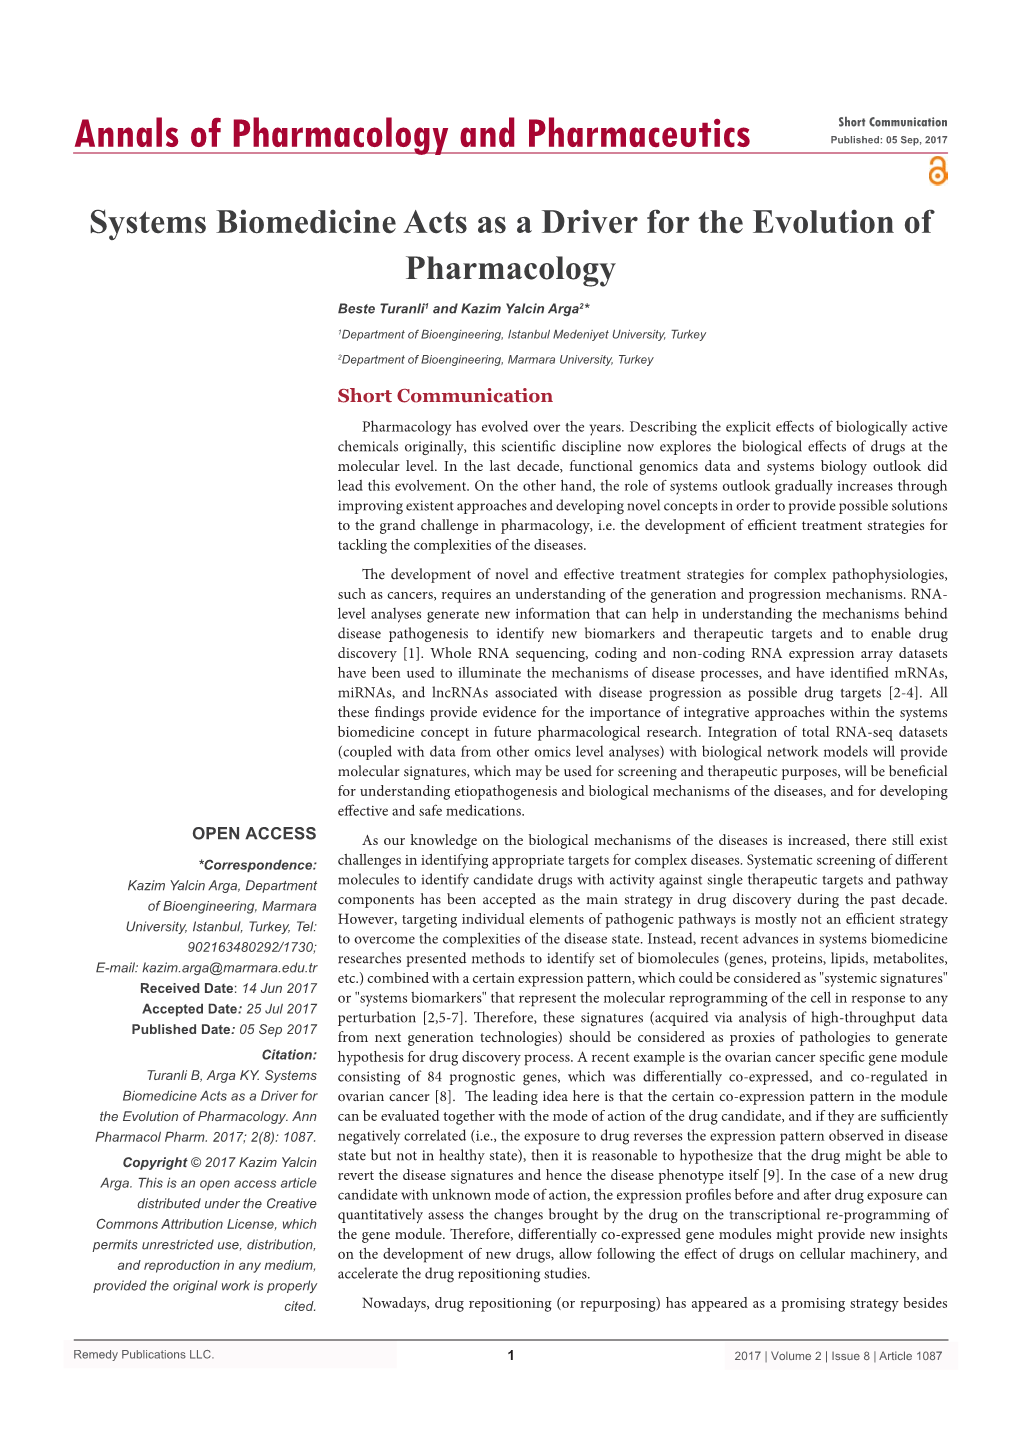 Systems Biomedicine Acts As a Driver for the Evolution of Pharmacology